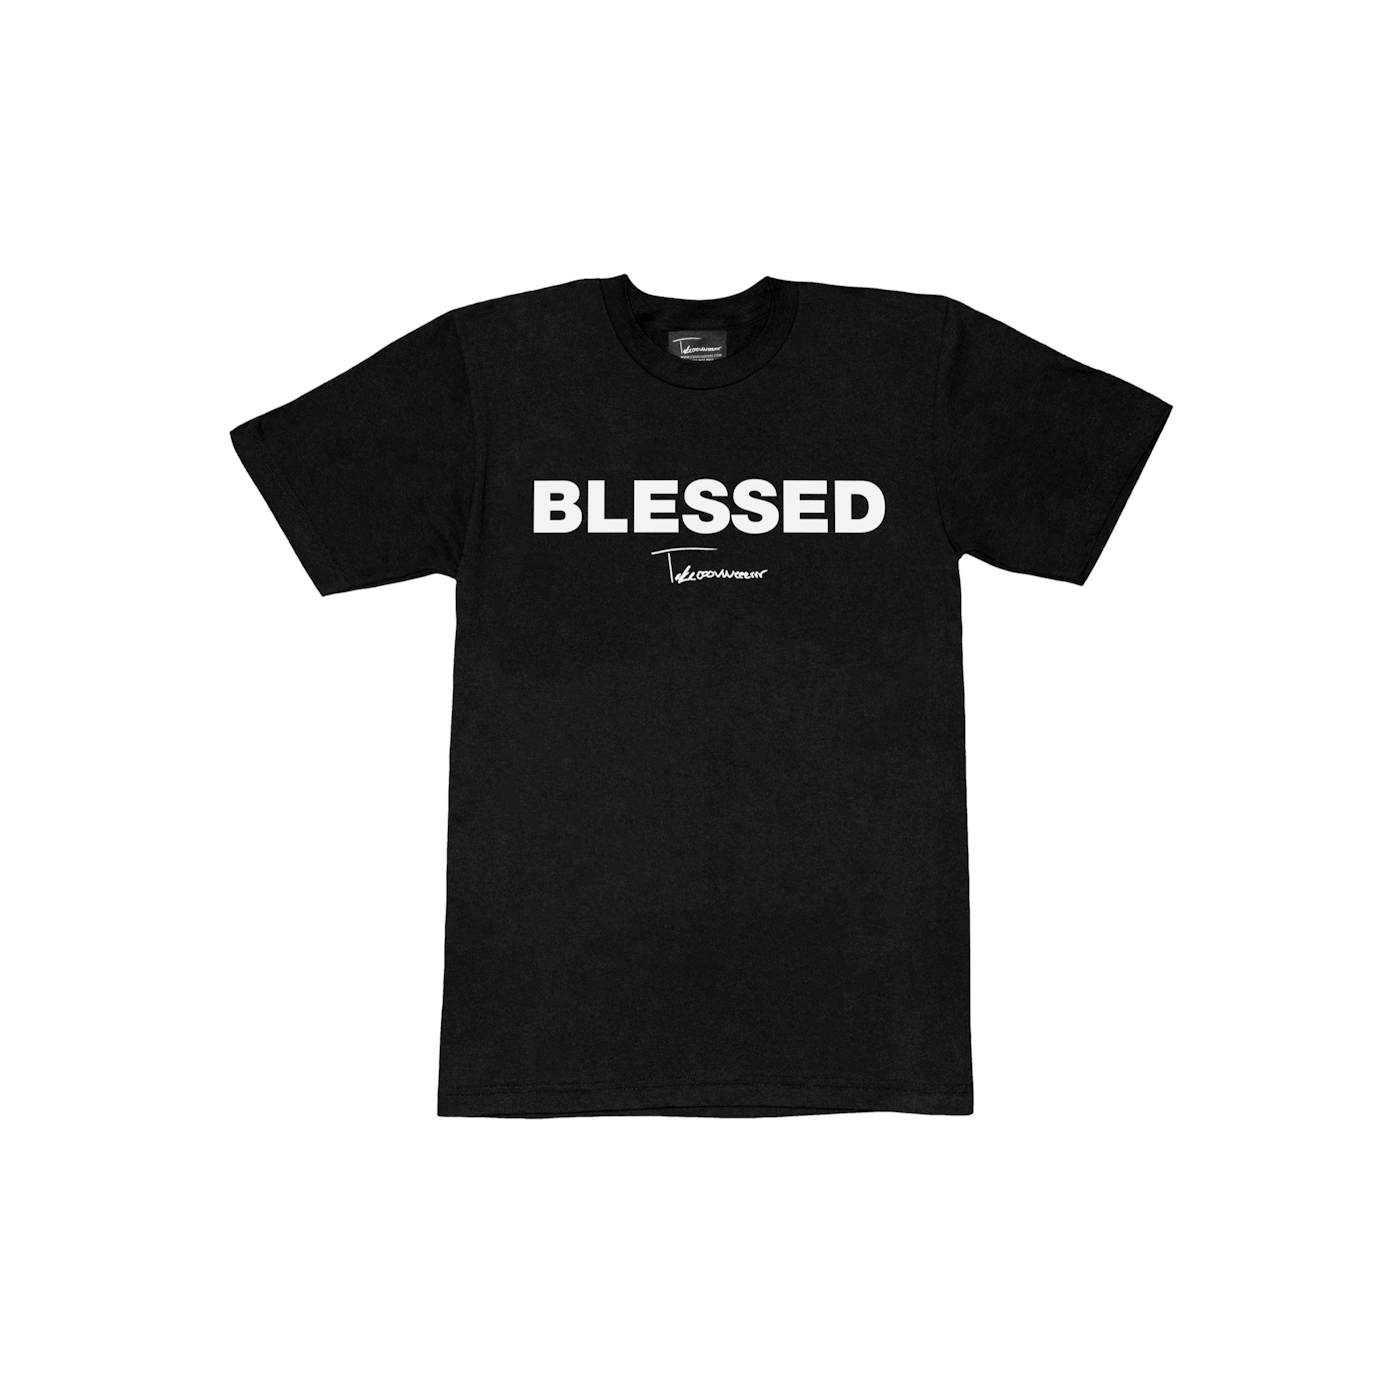 Taylor J Takeover Blessed Tee (Black/White)